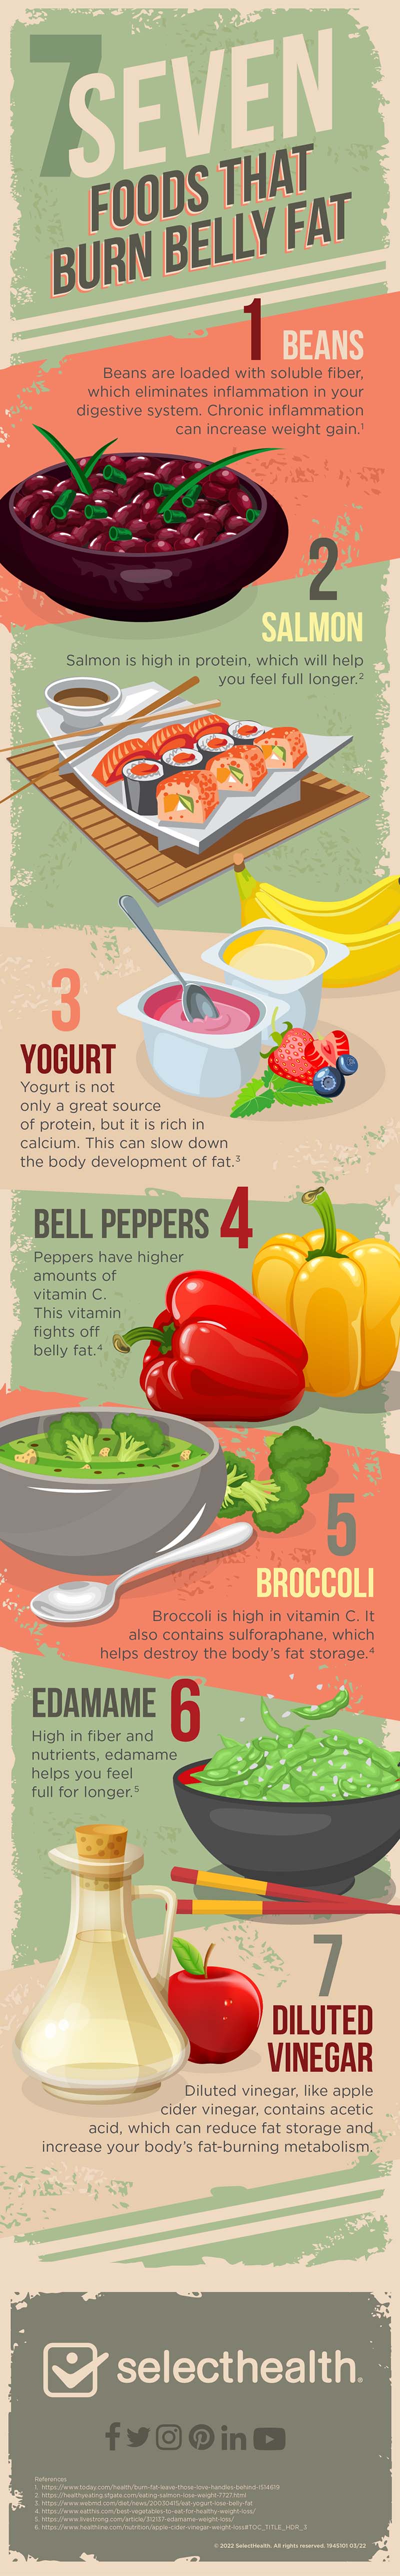 7 Foods that Burn Belly Fat Infographic